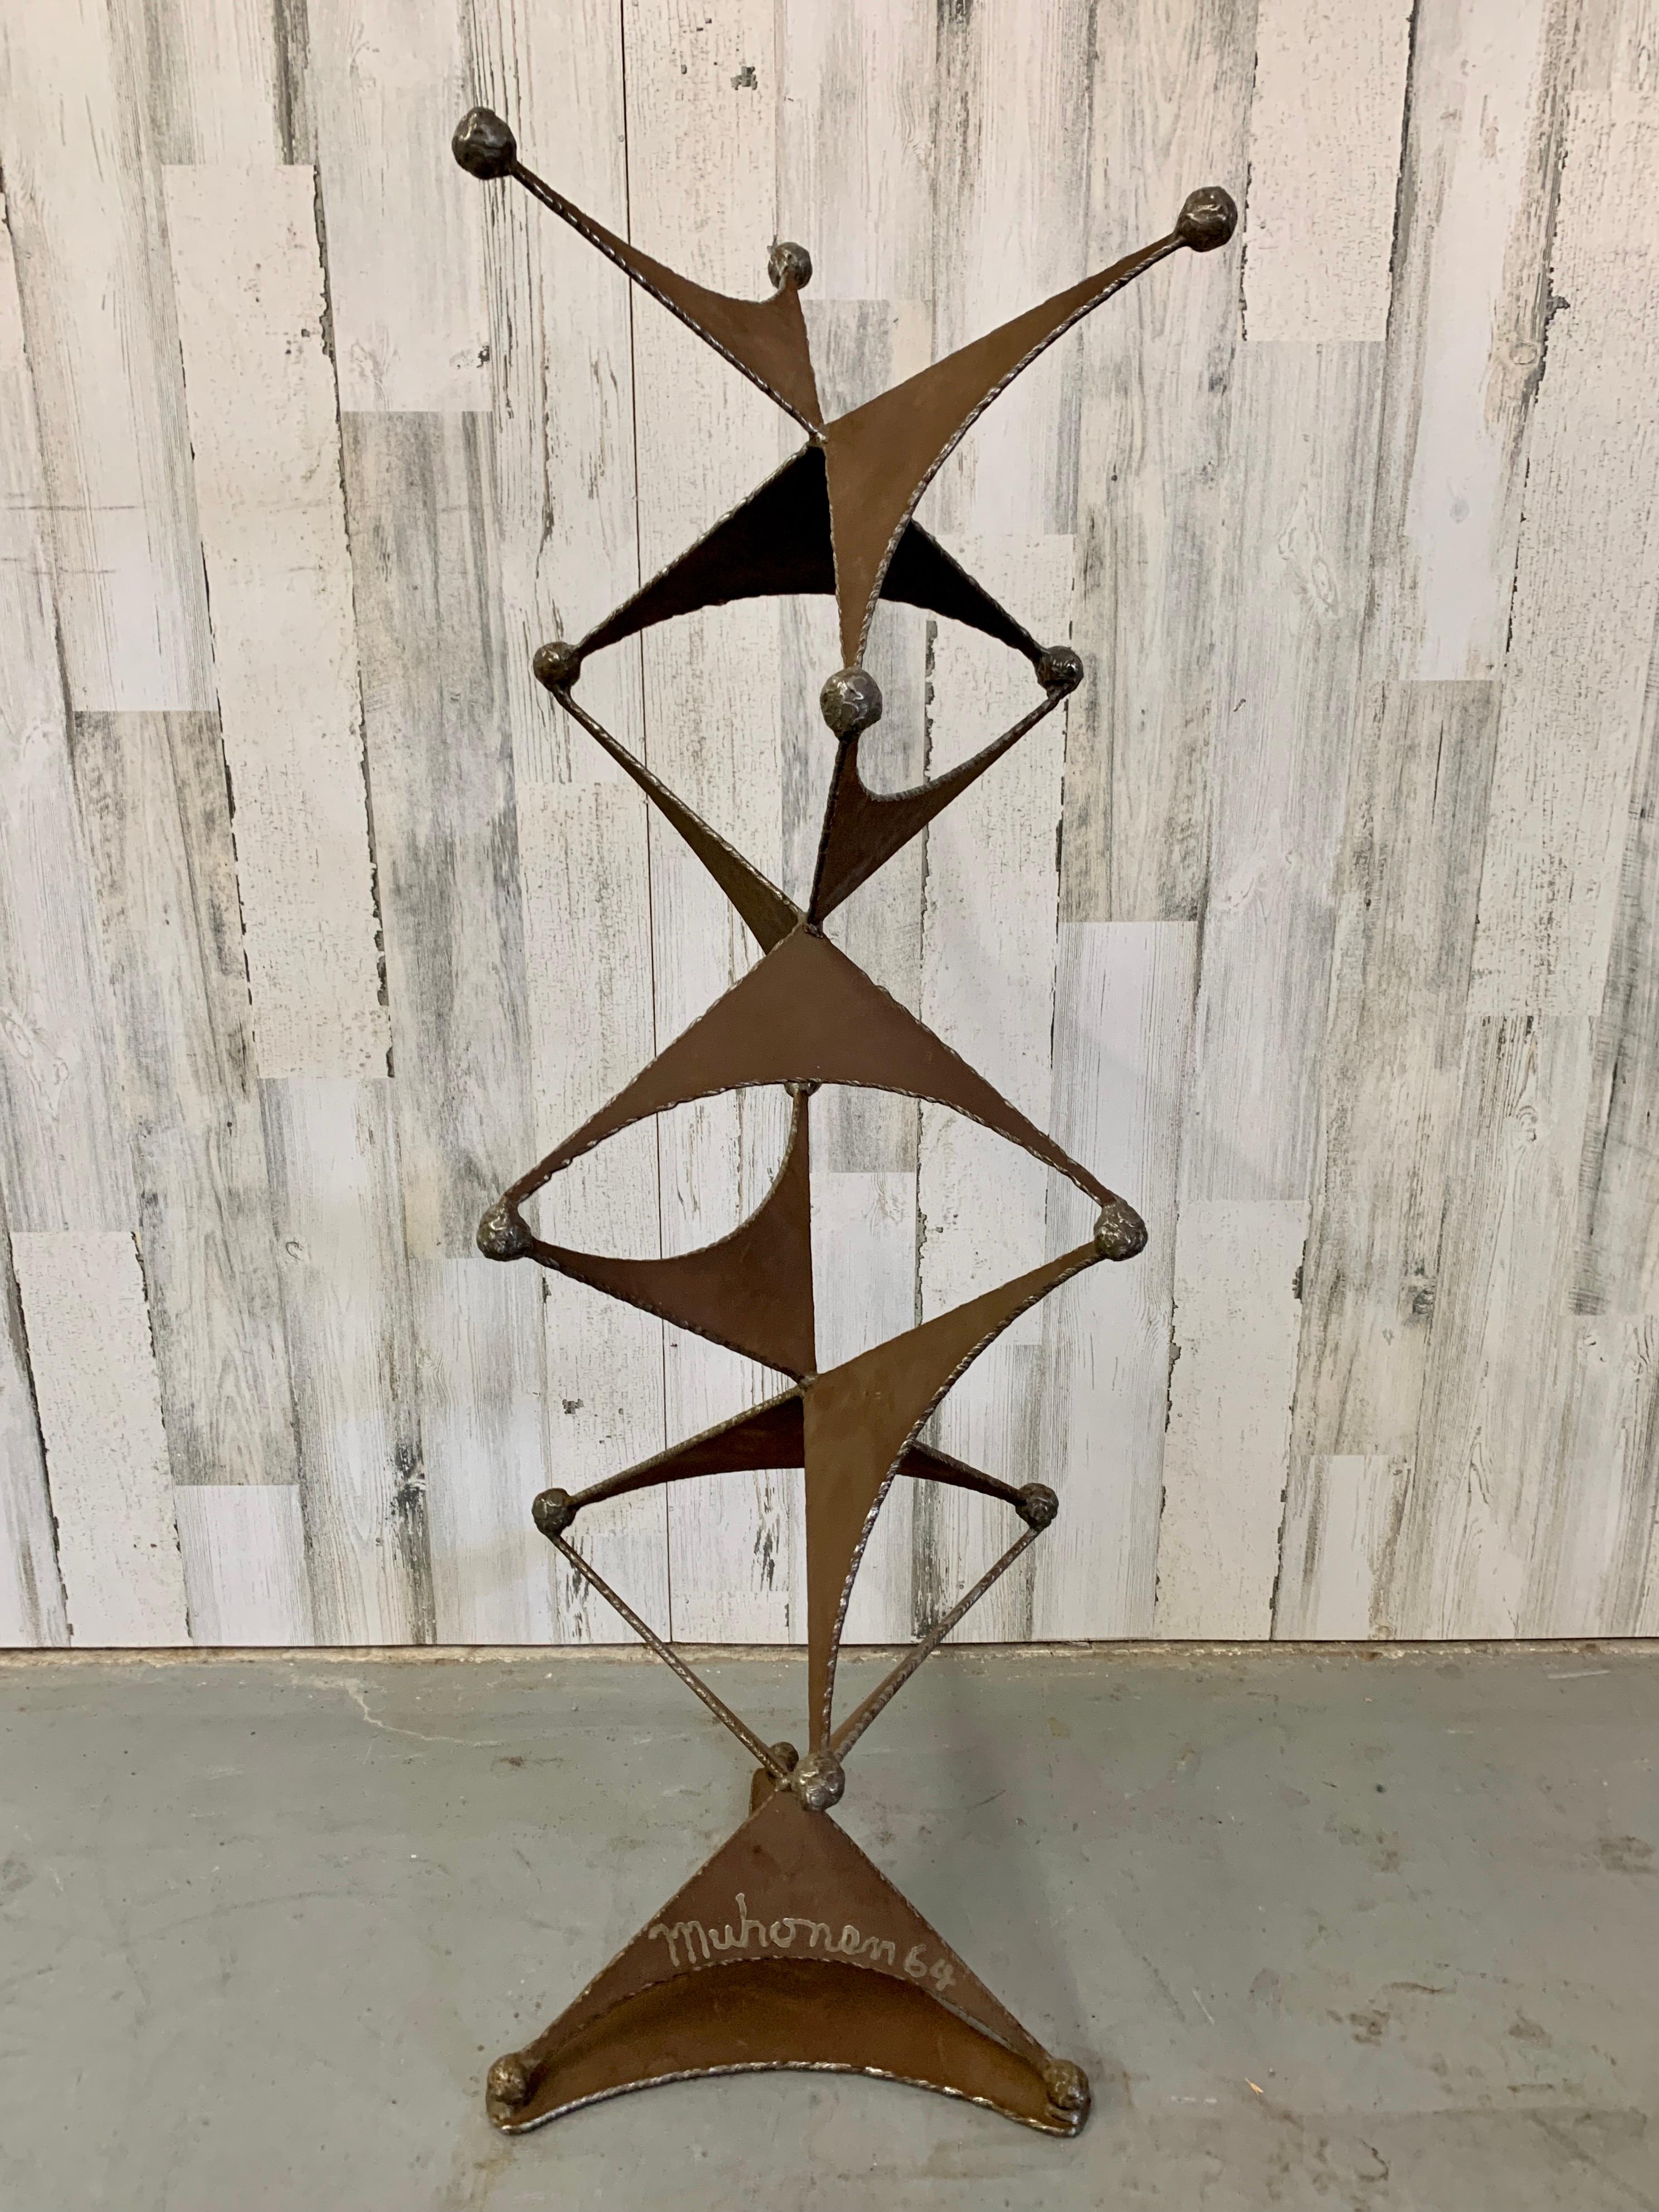 Large steel sculpture very sturdy perfect for garden art or inside the home. These stacked jax appear to be dancing in a playful manner. Artist is unknown.